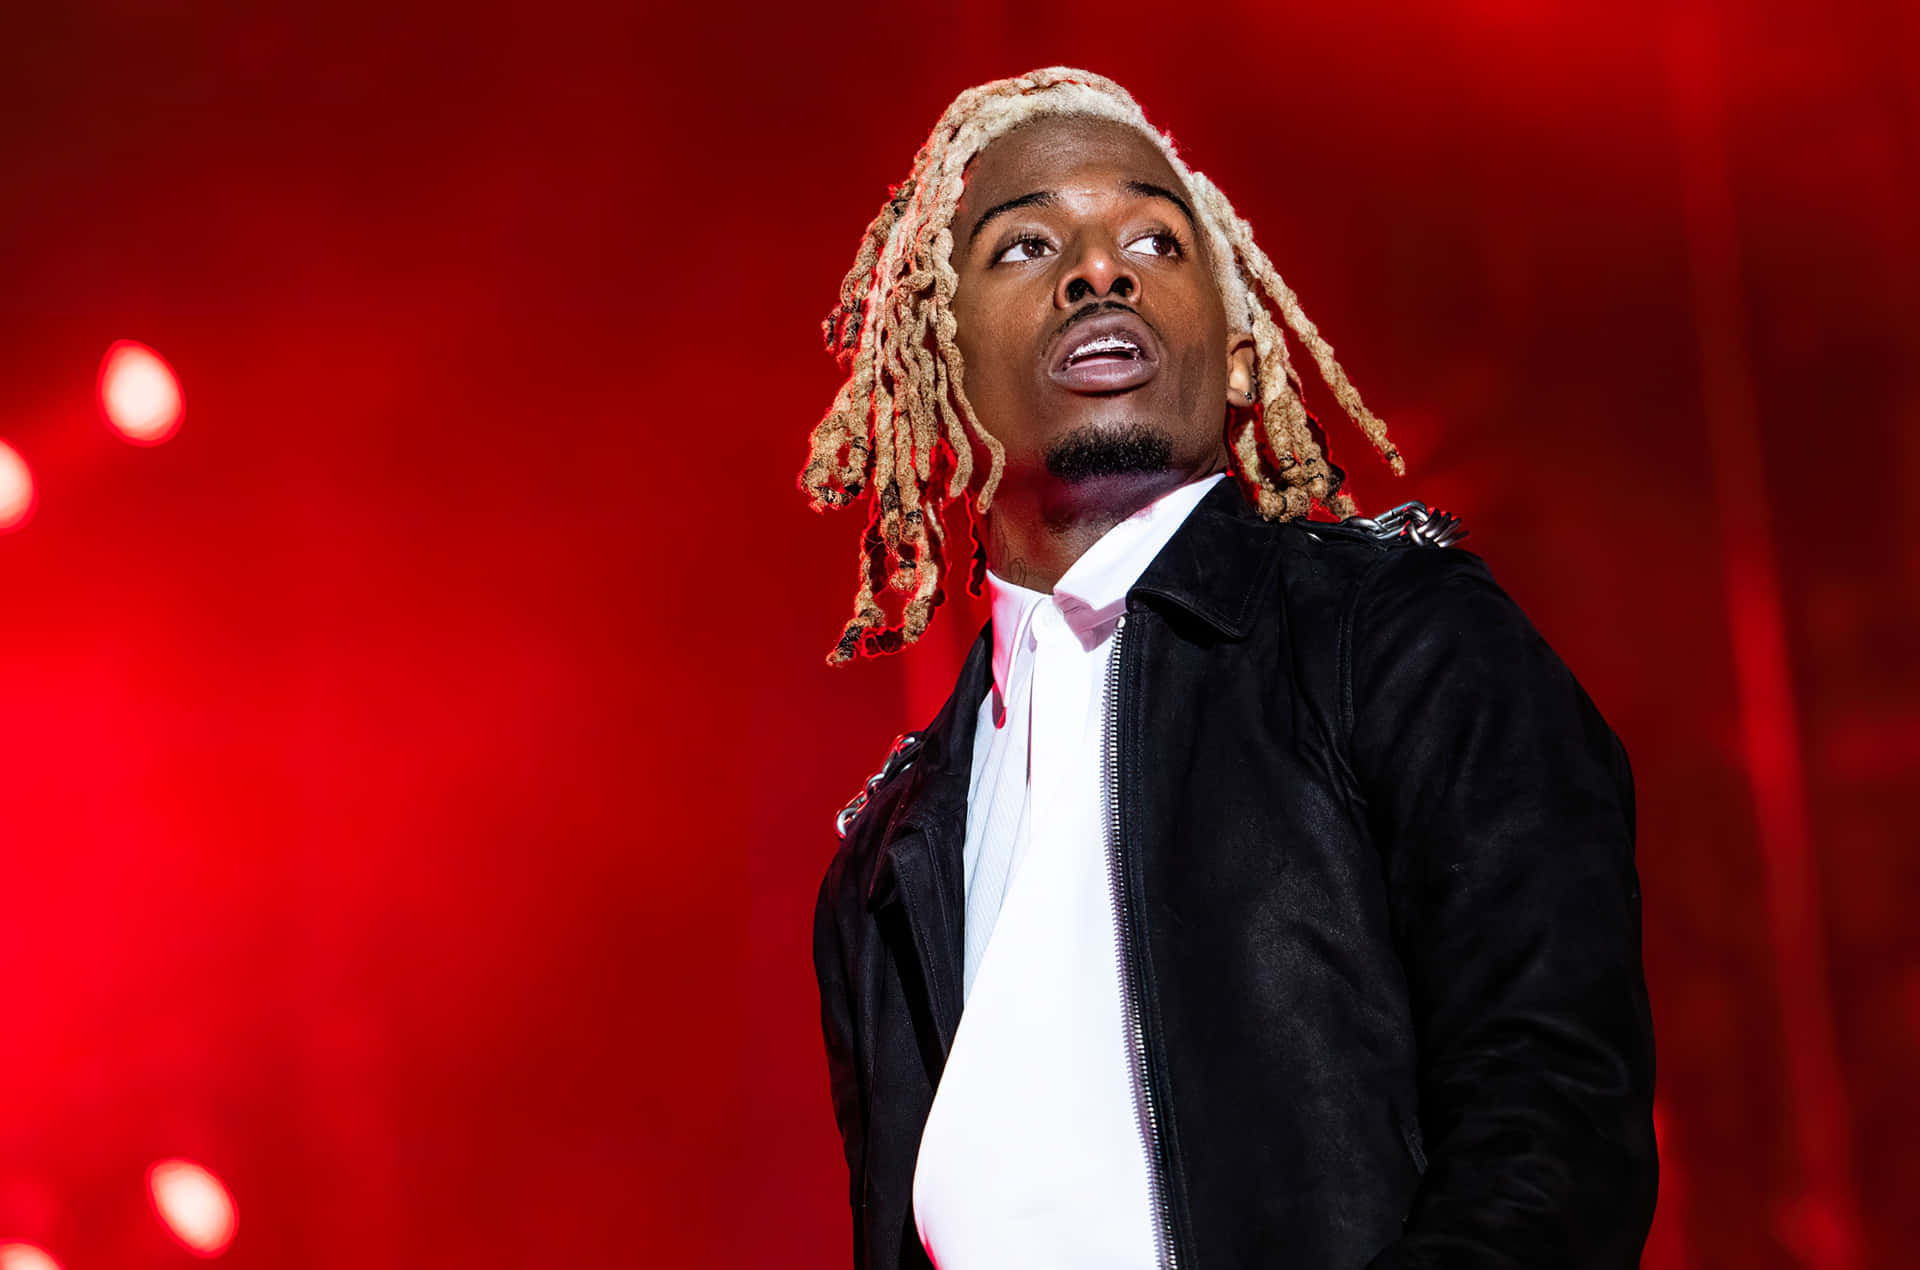 Captivating Image of Carti with Blonde Dreadlocks Wallpaper